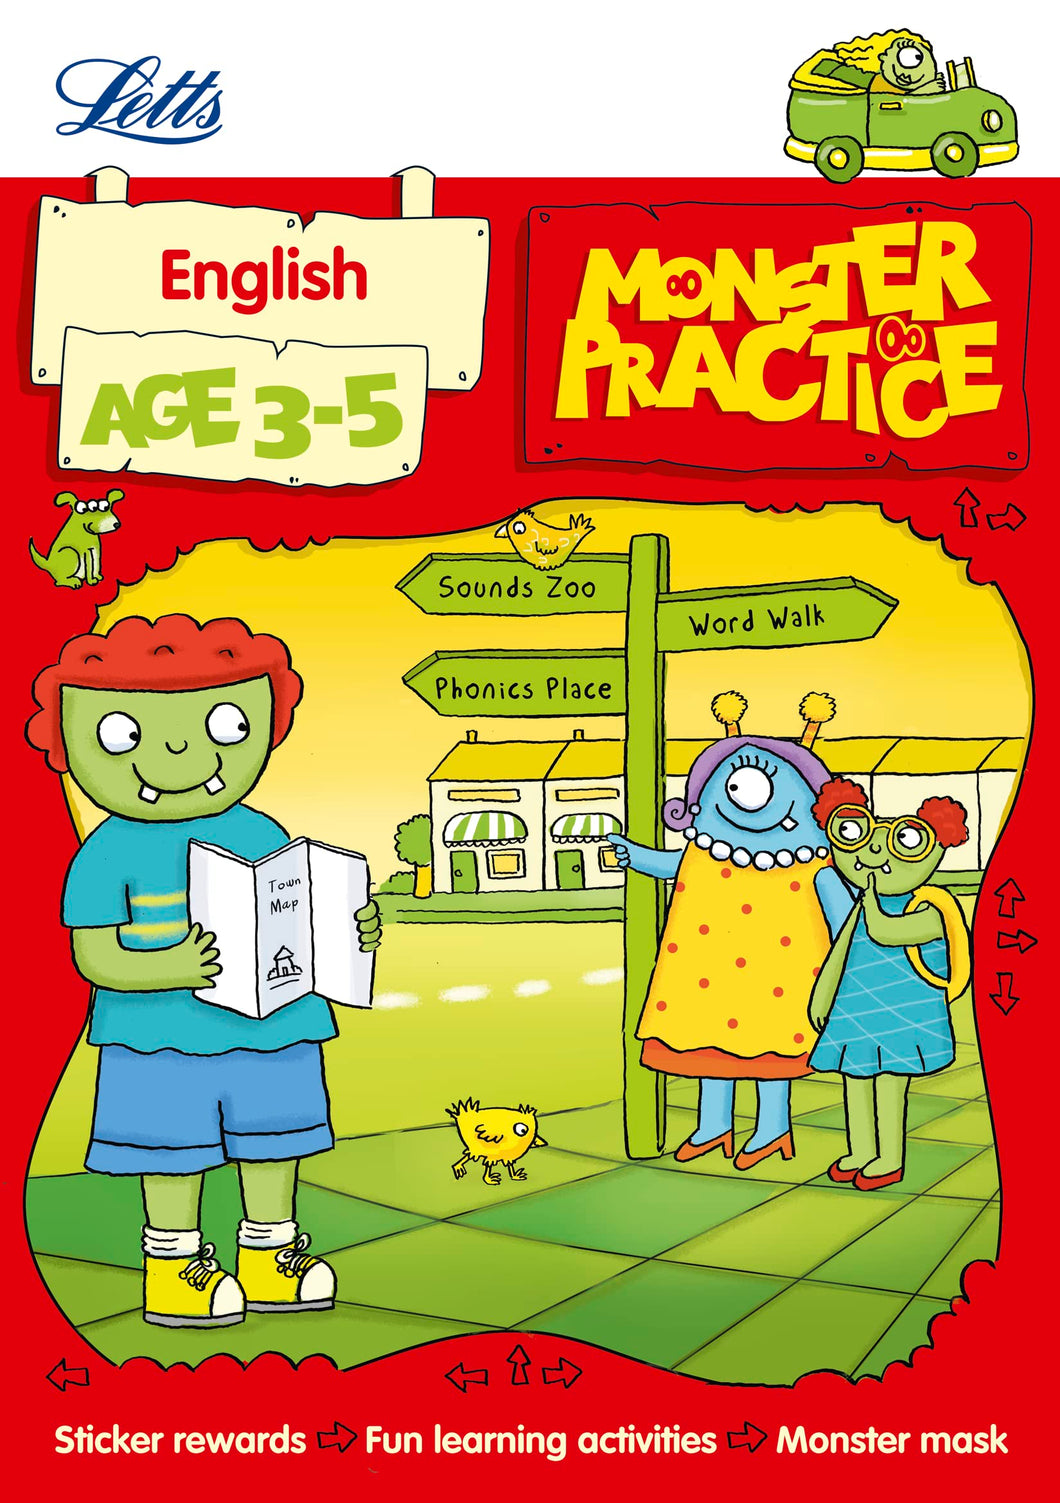 Letts Monster Practice - English Age 3-5